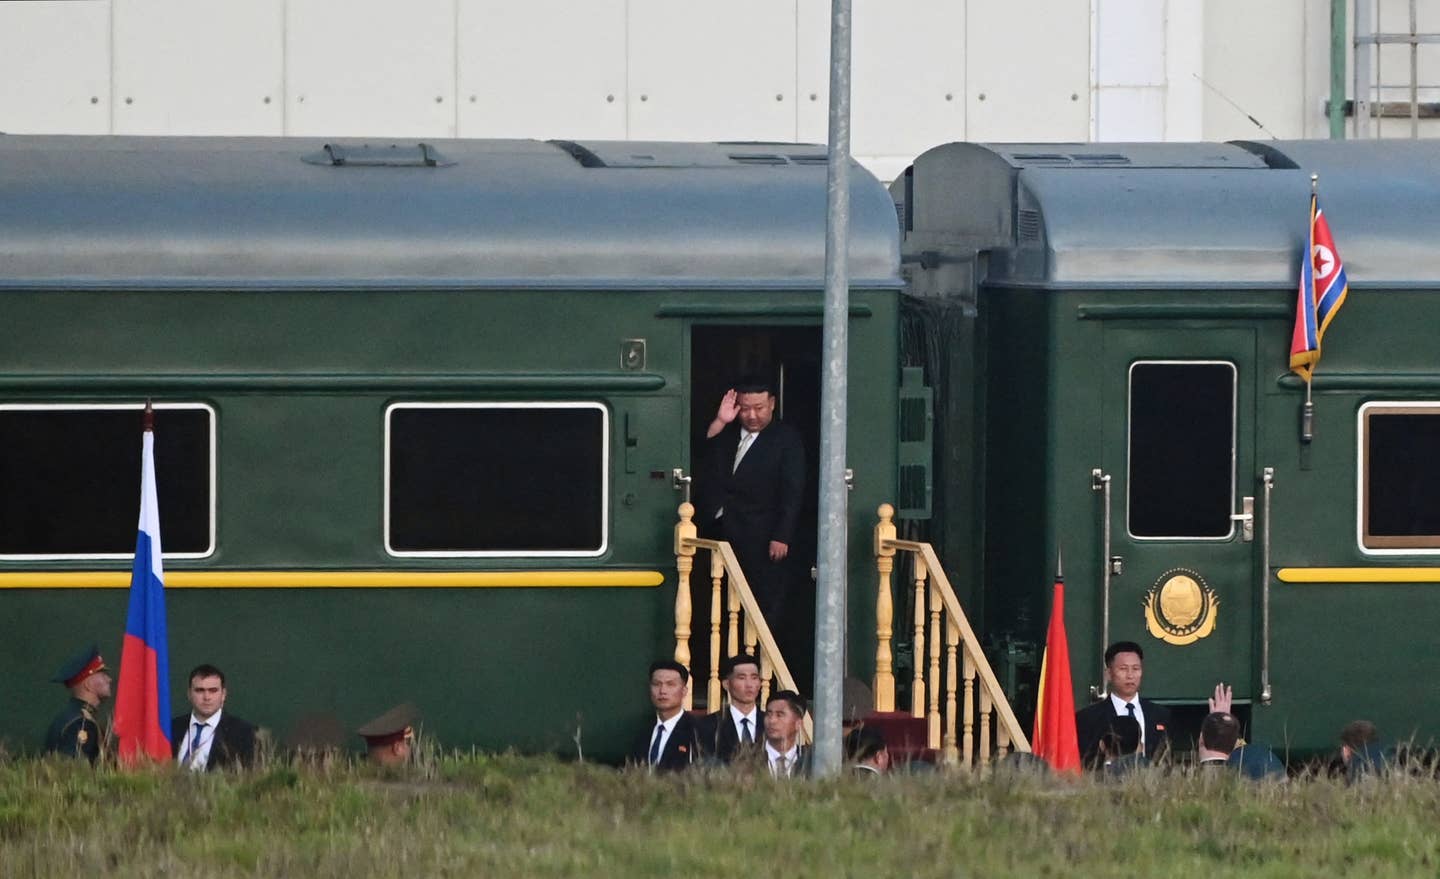 Kim Jong Un leaves Vostochny Cosmodrome in the Amur region on September 13, 2023, via his armored train, after talks with President Putin. <em>Photo by PAVEL BYRKIN/POOL/AFP via Getty Images</em>